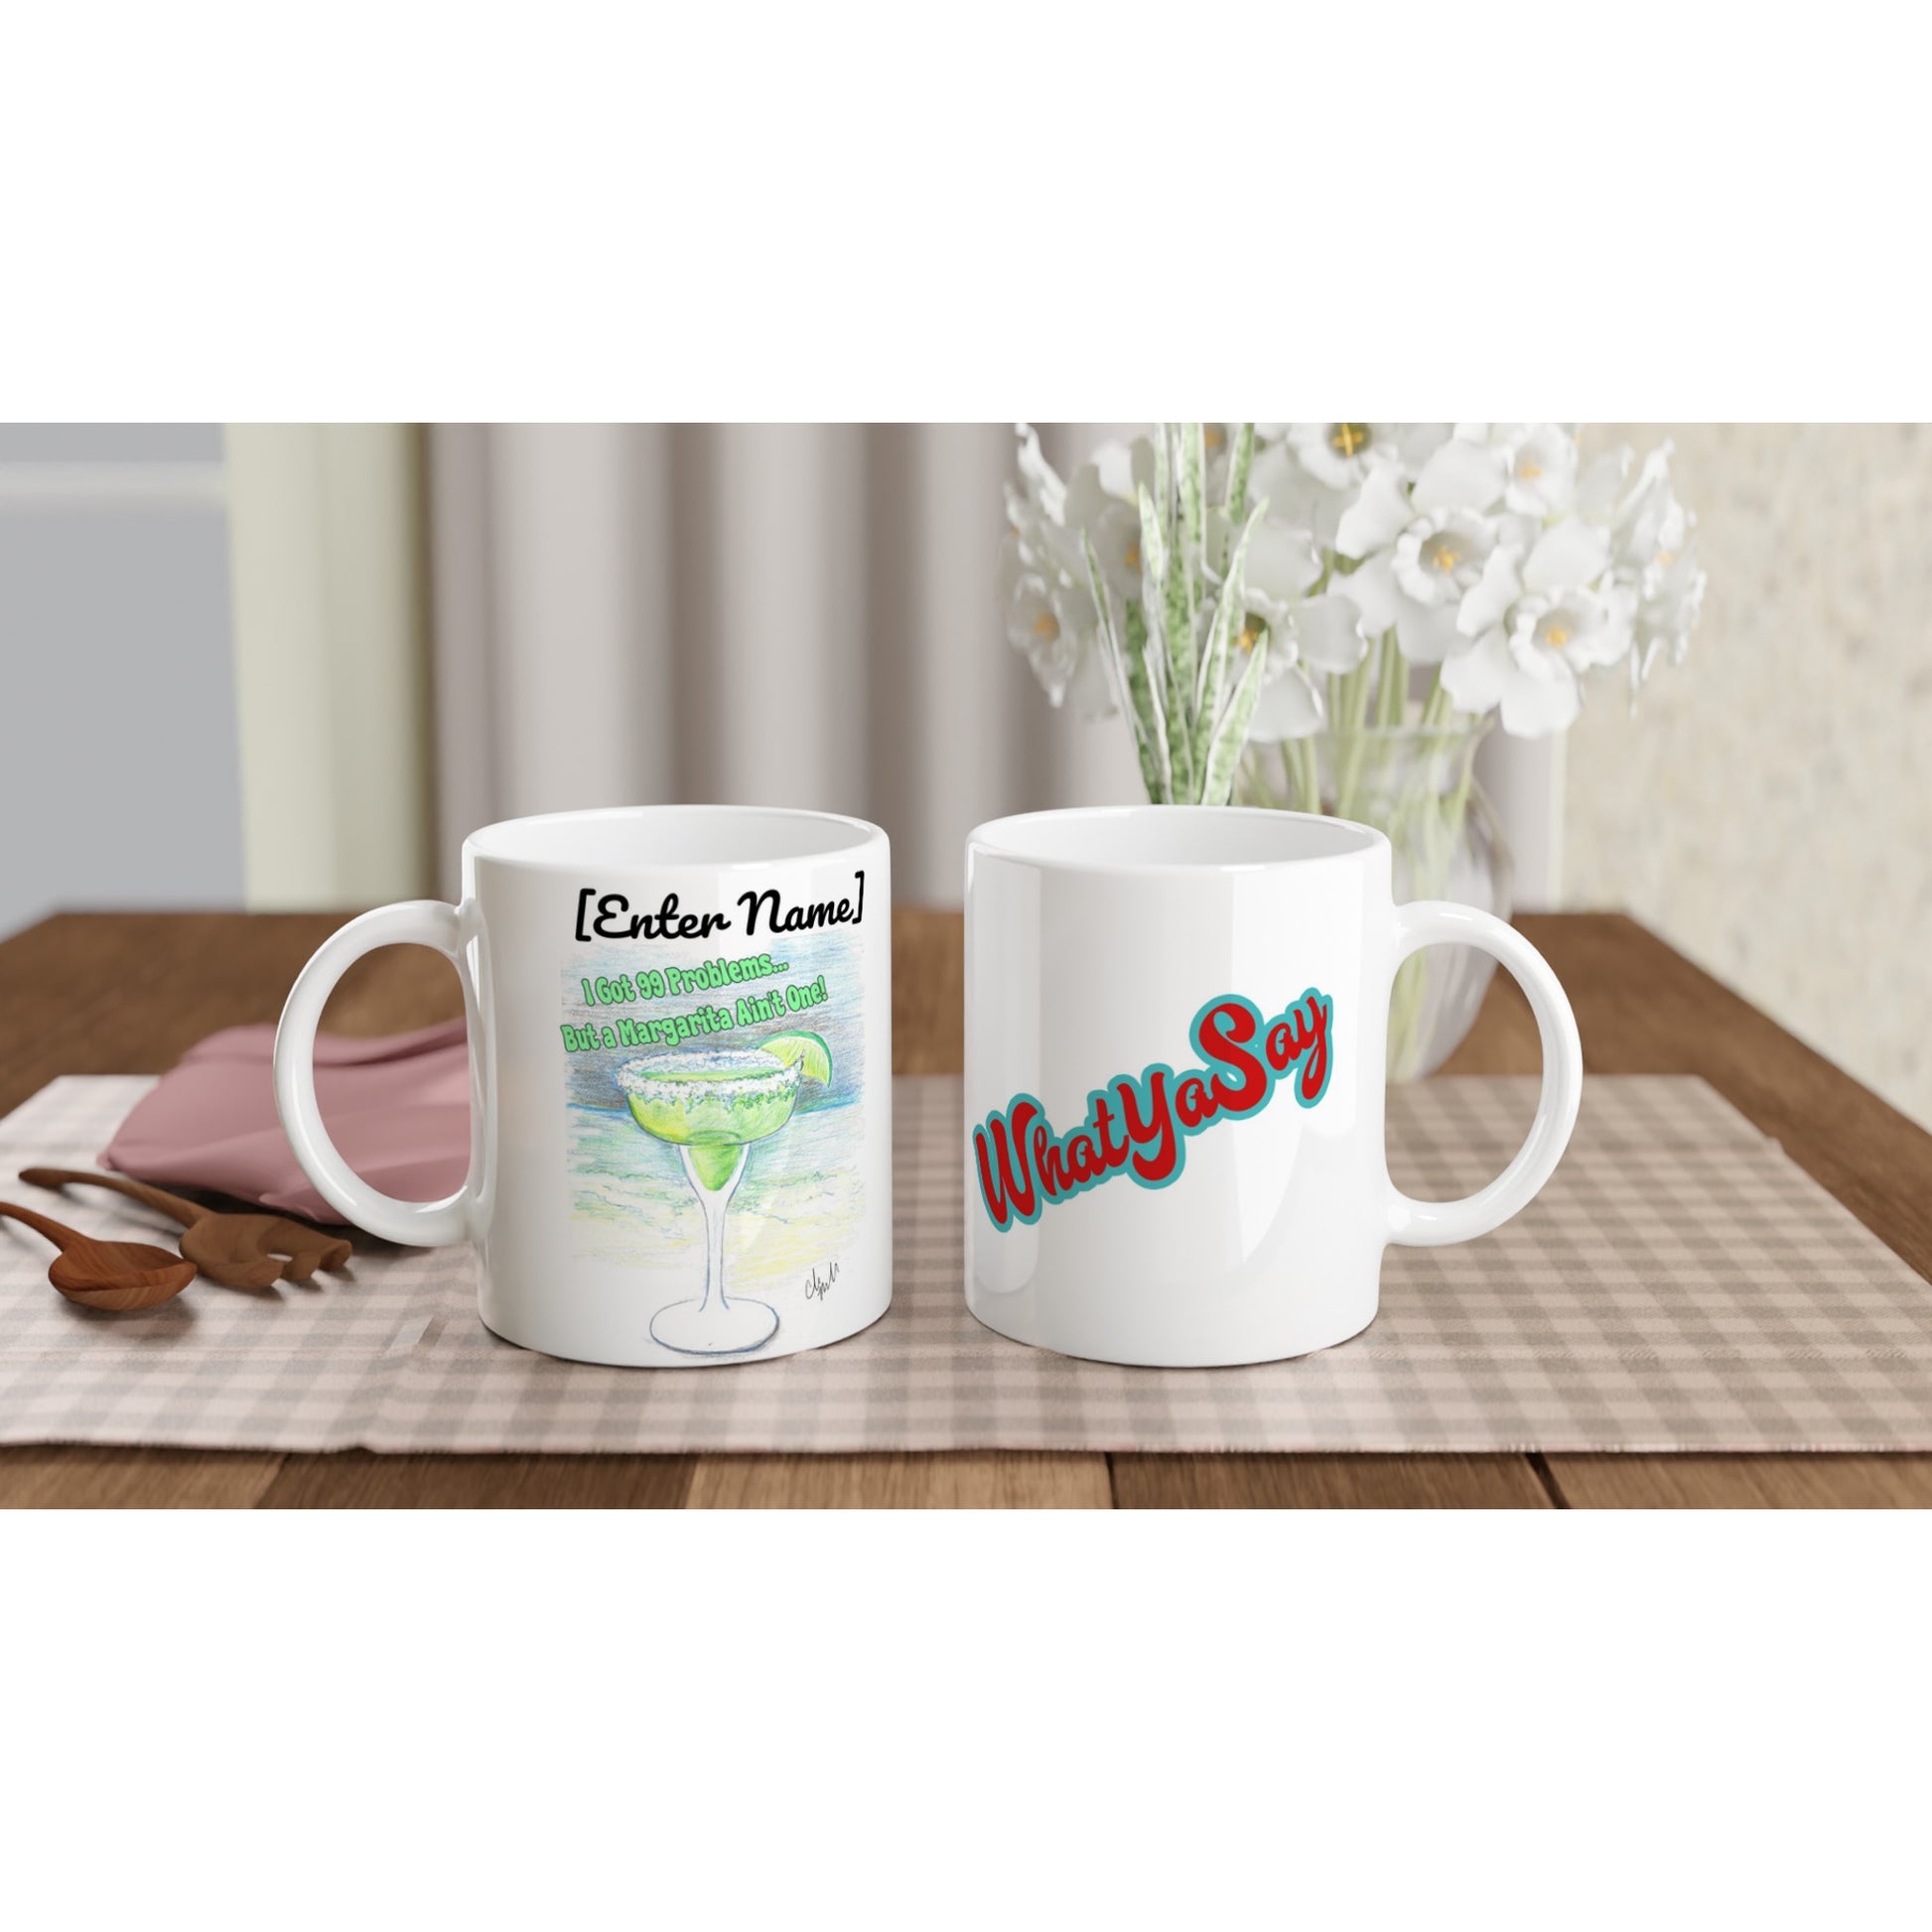 Two Personalized white ceramic 11oz mugs with motto I Got 99 Problems But a Margarita Aint One on front and WhatYa Say logo on back coffee mugs are dishwasher and microwave safe from WhatYa Say Apparel sitting on coffee table with placemat.